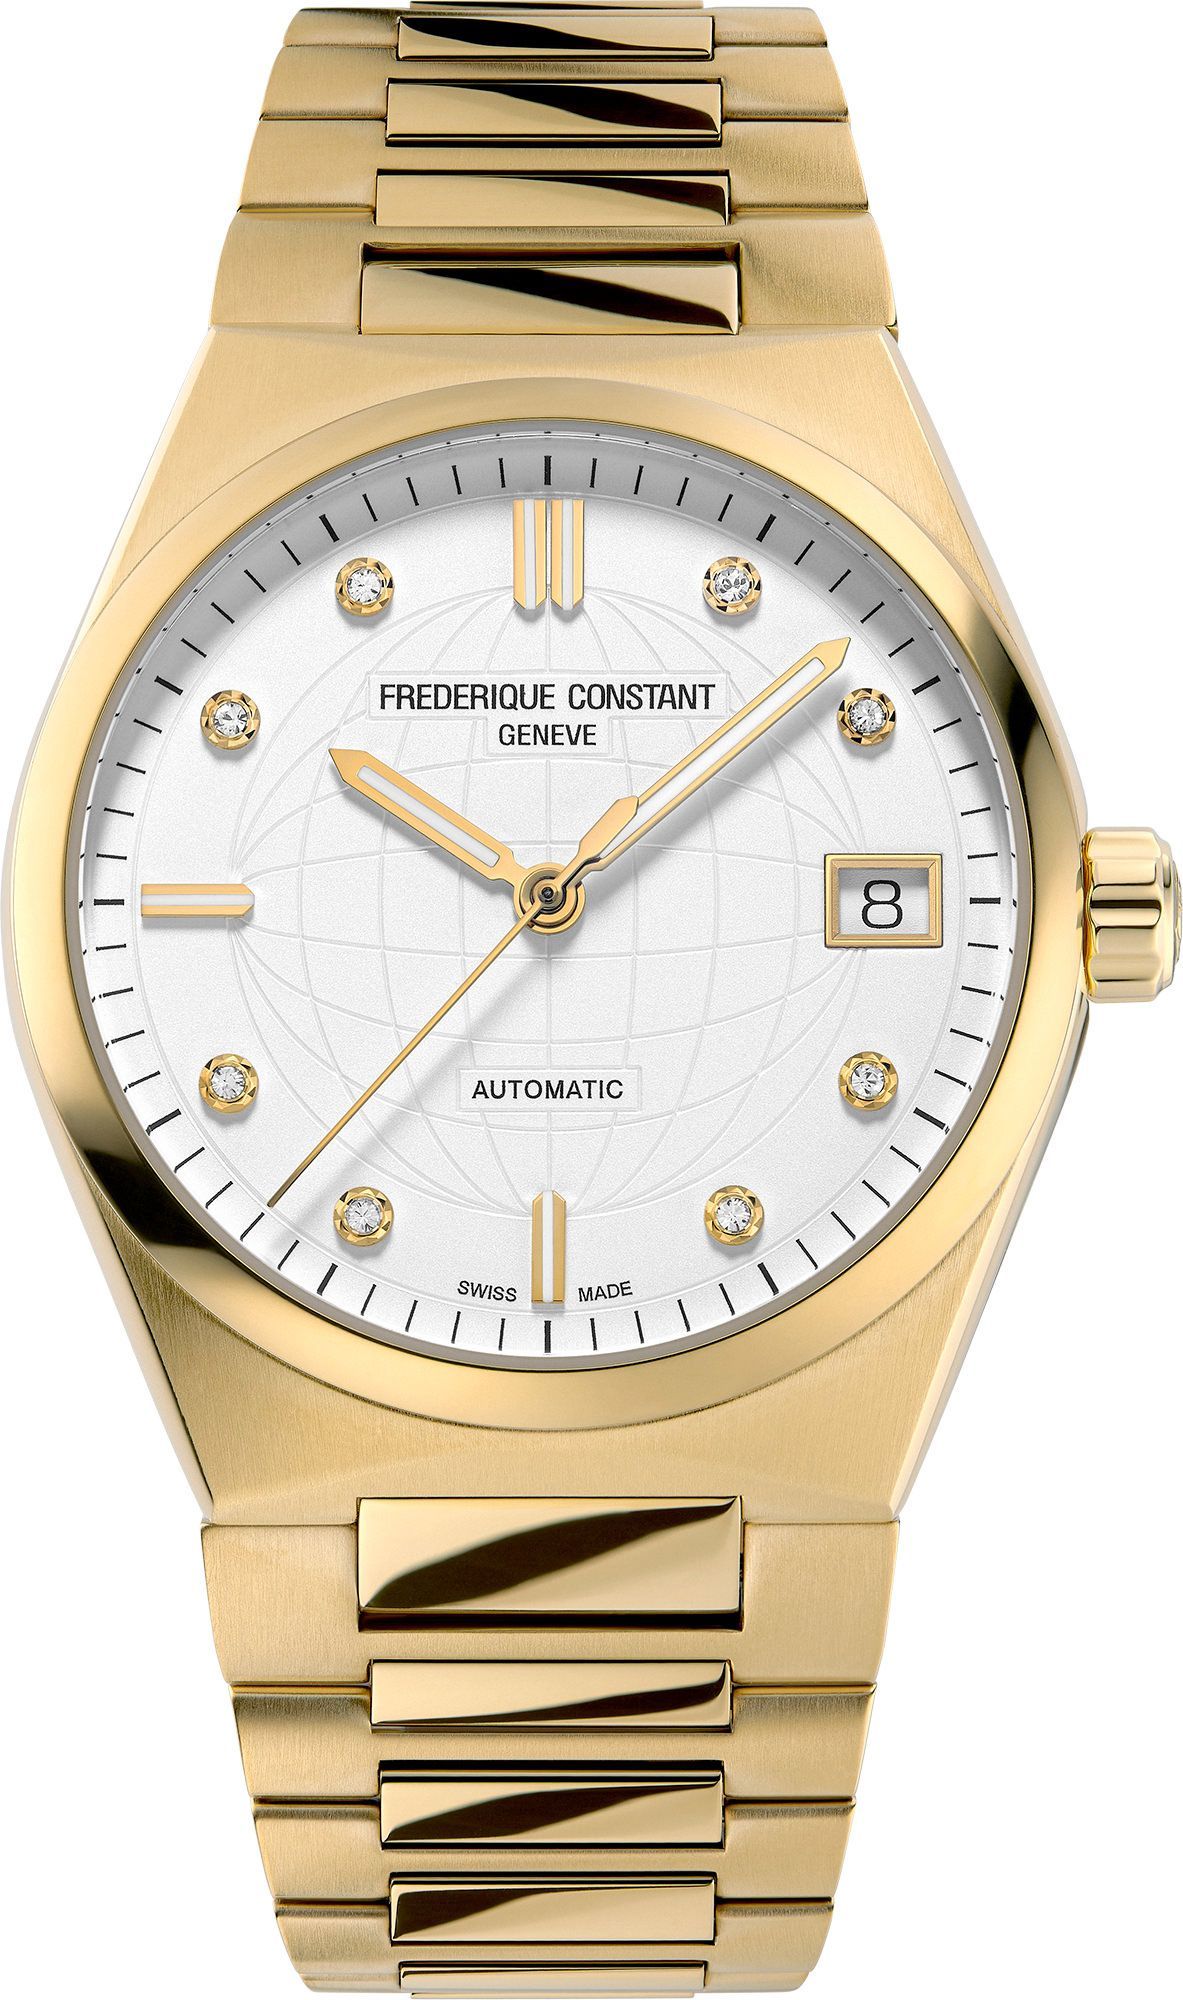 Frederique Constant Highlife Highlife Ladies Automatic Silver Dial 34 mm Automatic Watch For Men - 1